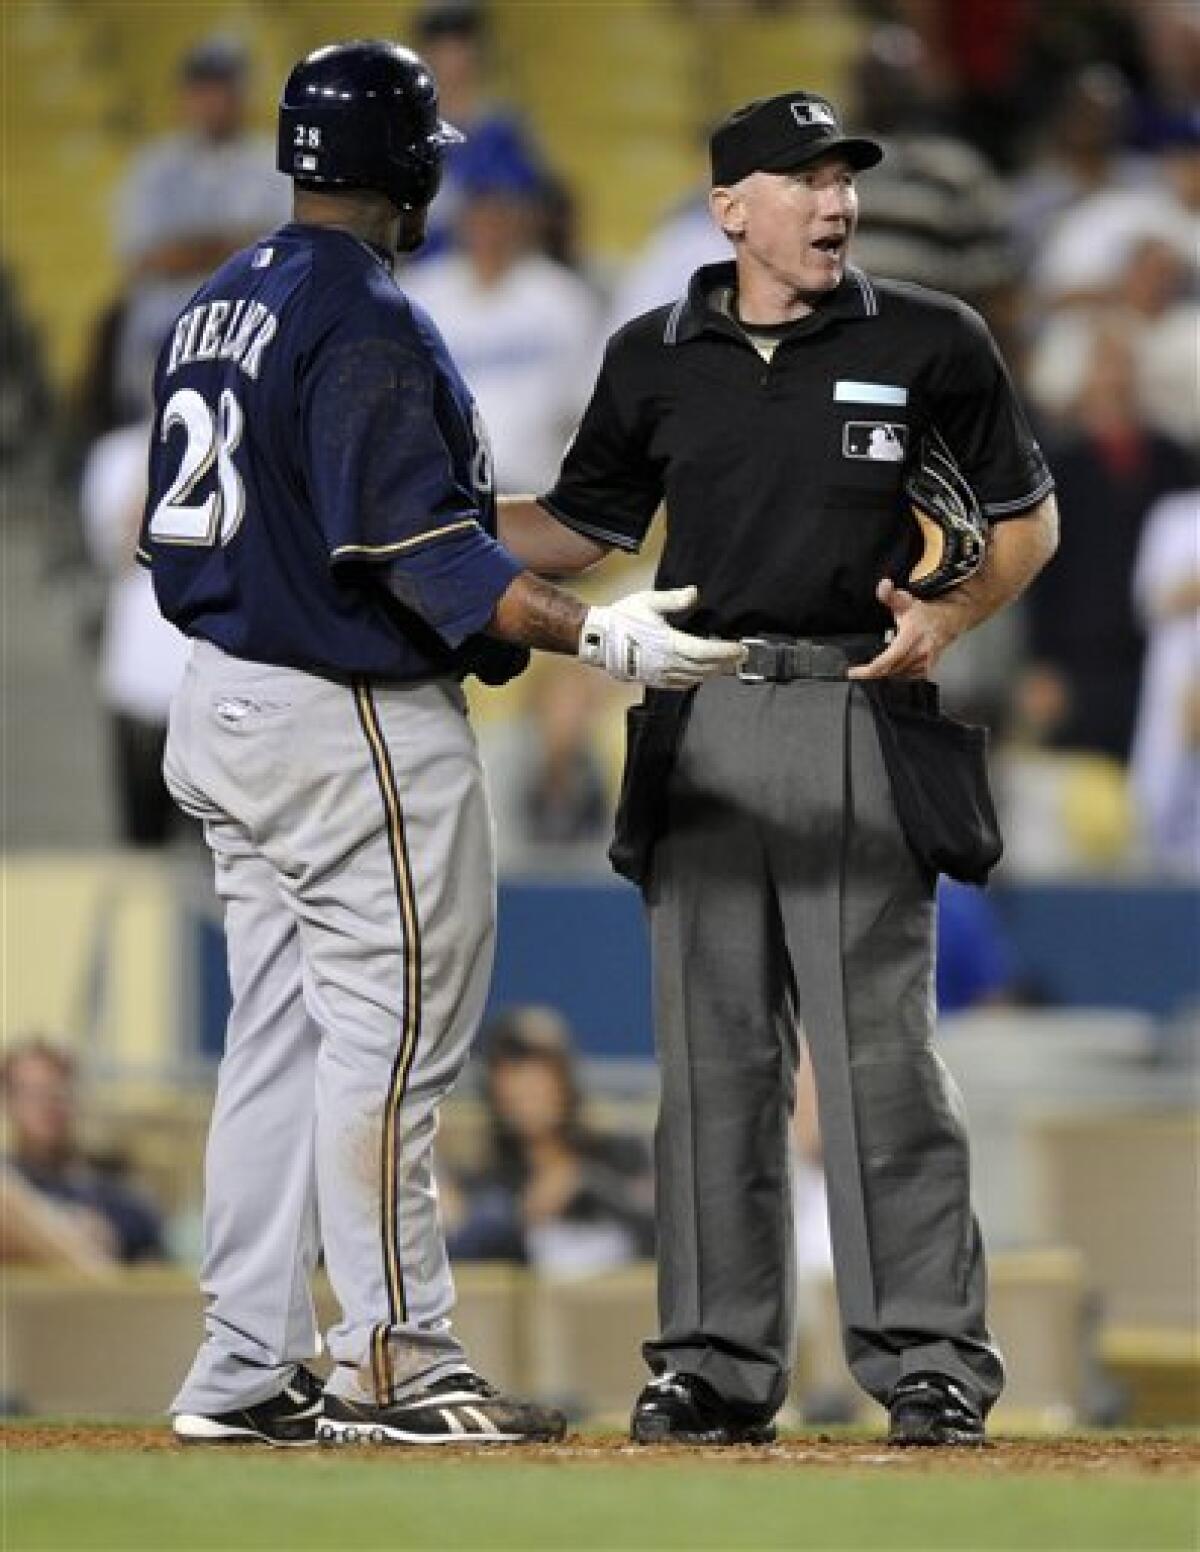 Furious Prince Fielder is stopped at Dodgers' door - The San Diego